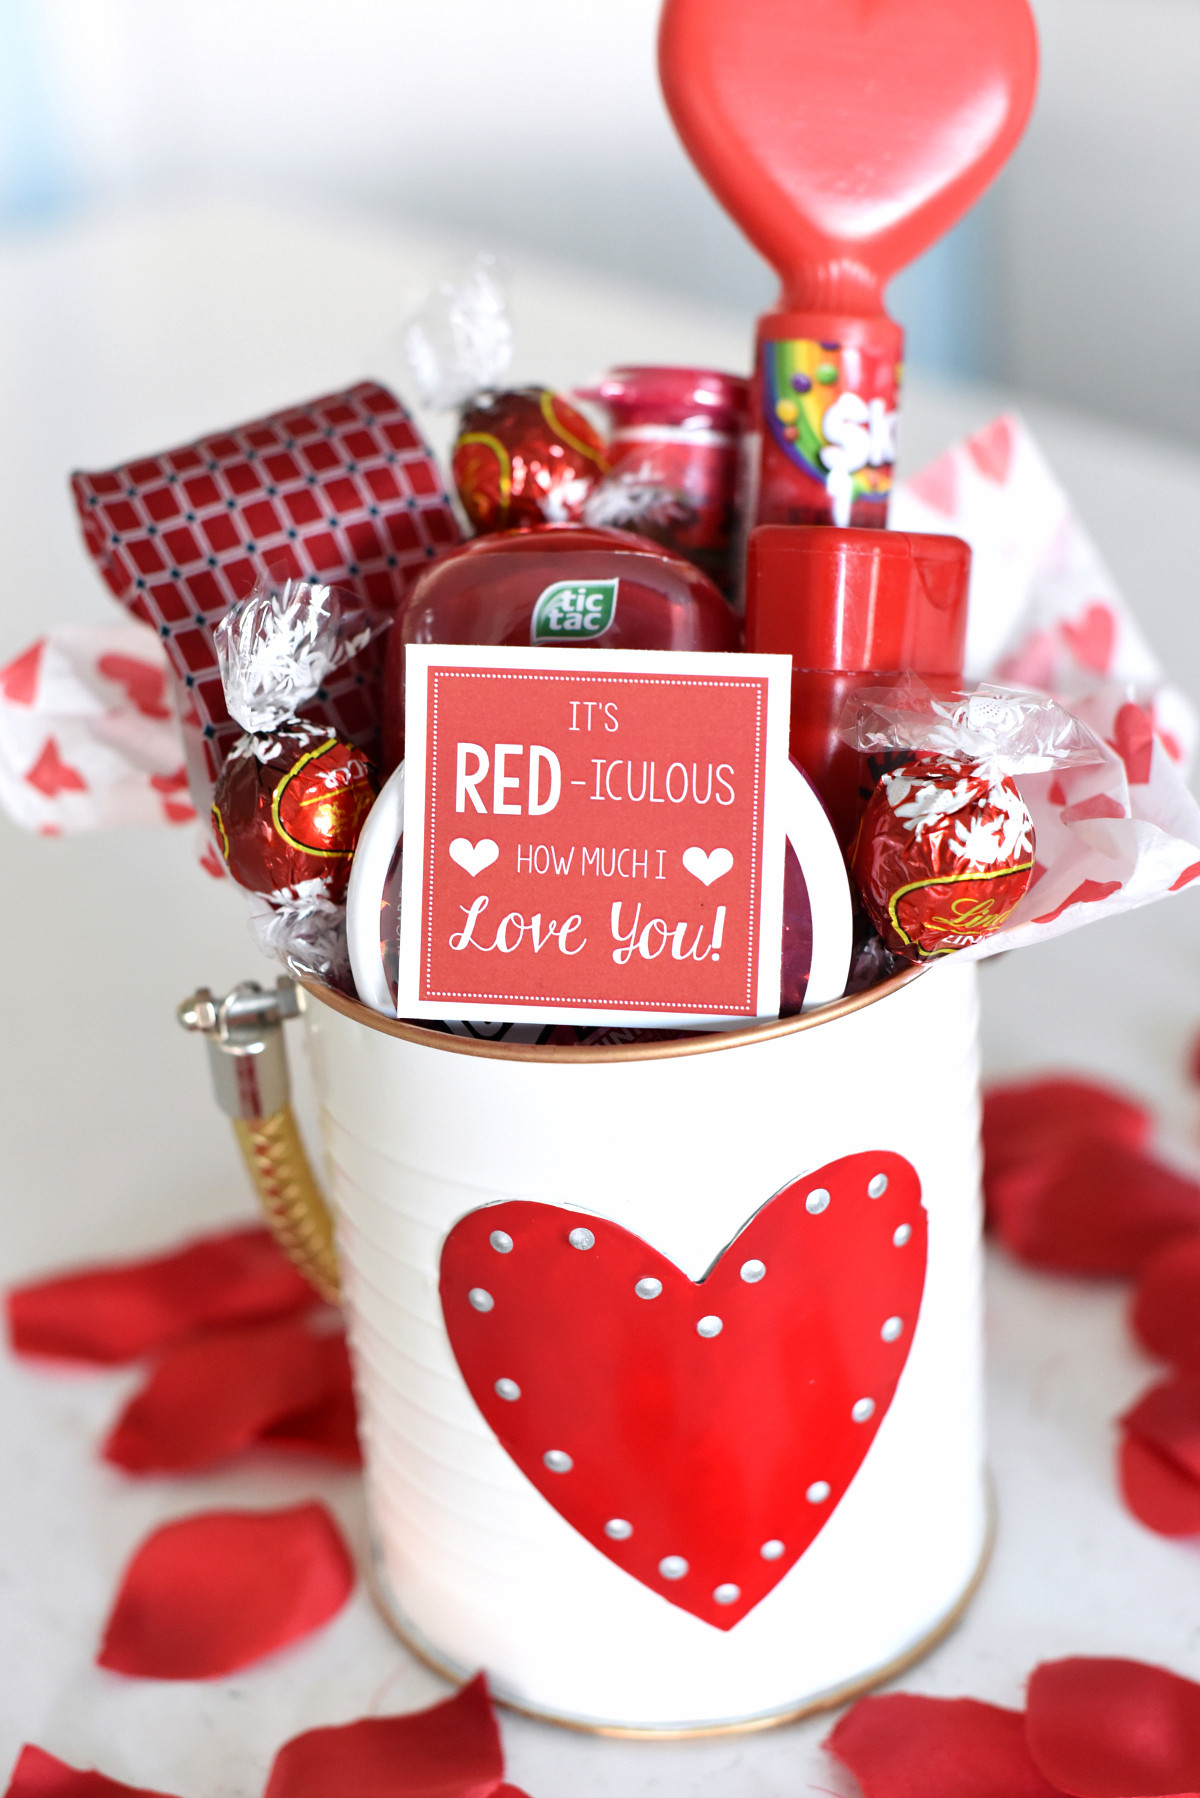 Valentines Day Gift Baskets Kids
 Cute Valentine s Day Gift Idea RED iculous Basket